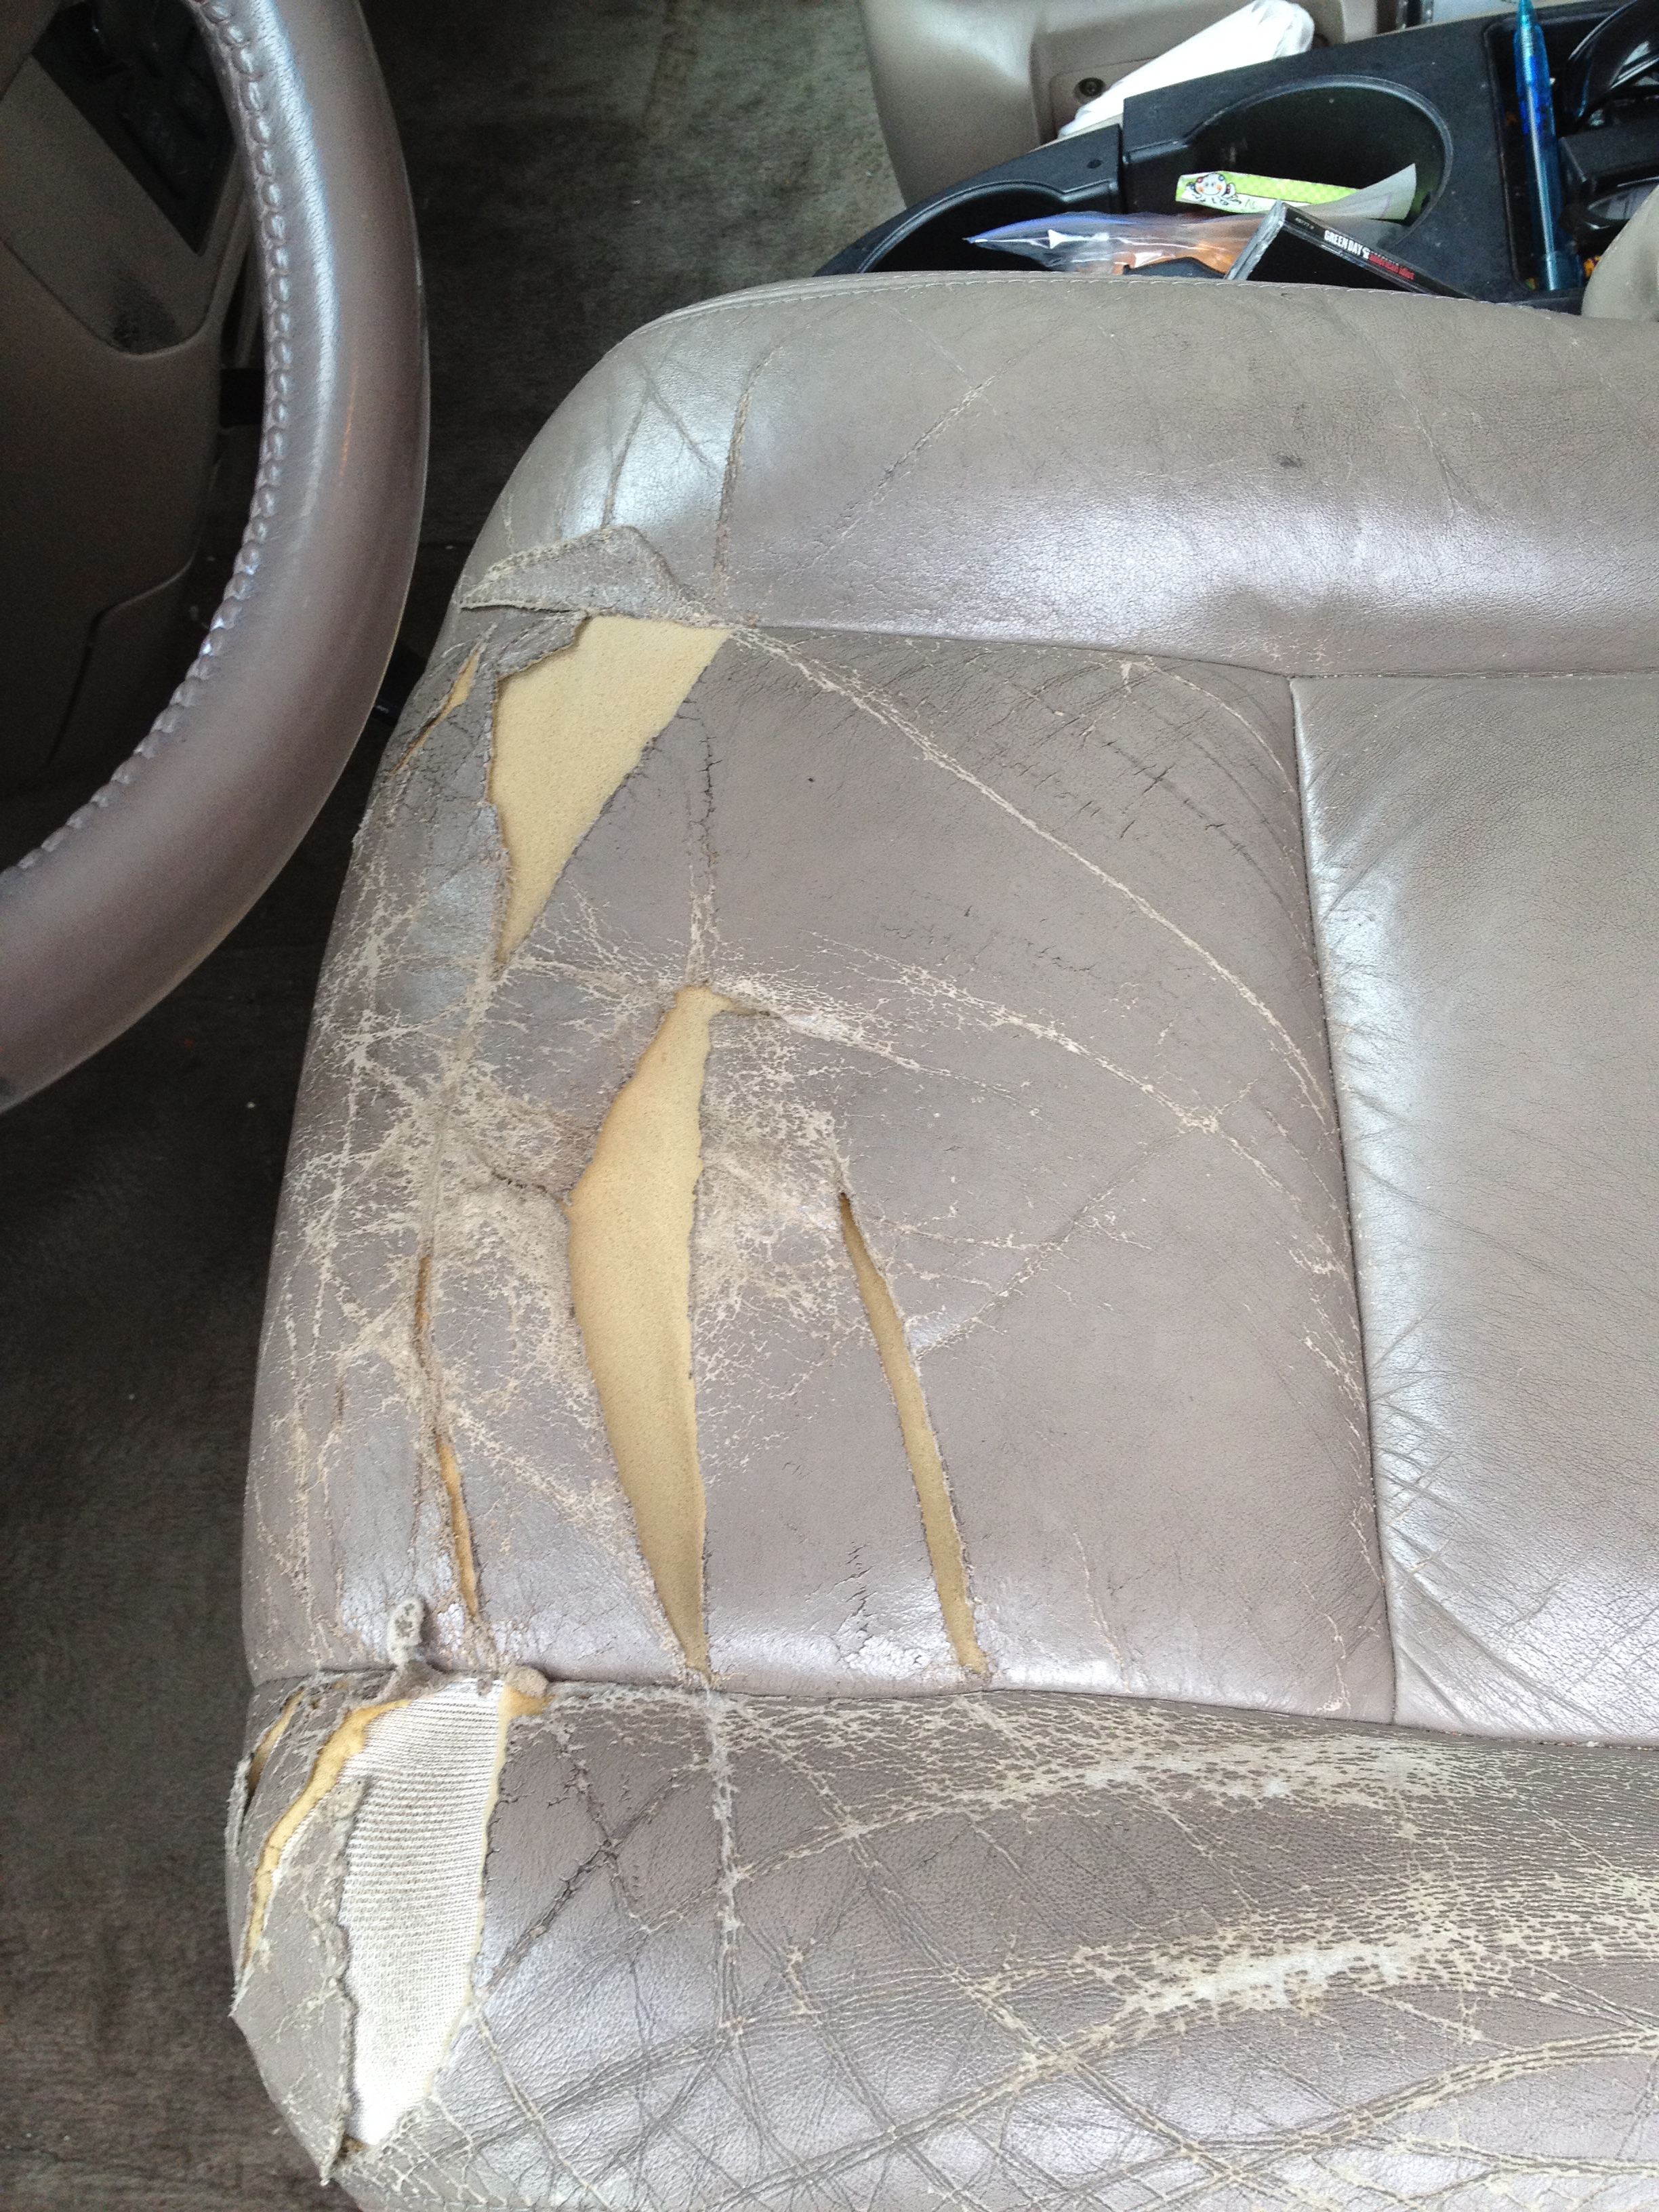 Torn Leather Seat Ed Cut Dry, How Much Does It Cost To Fix A Ripped Car Seat